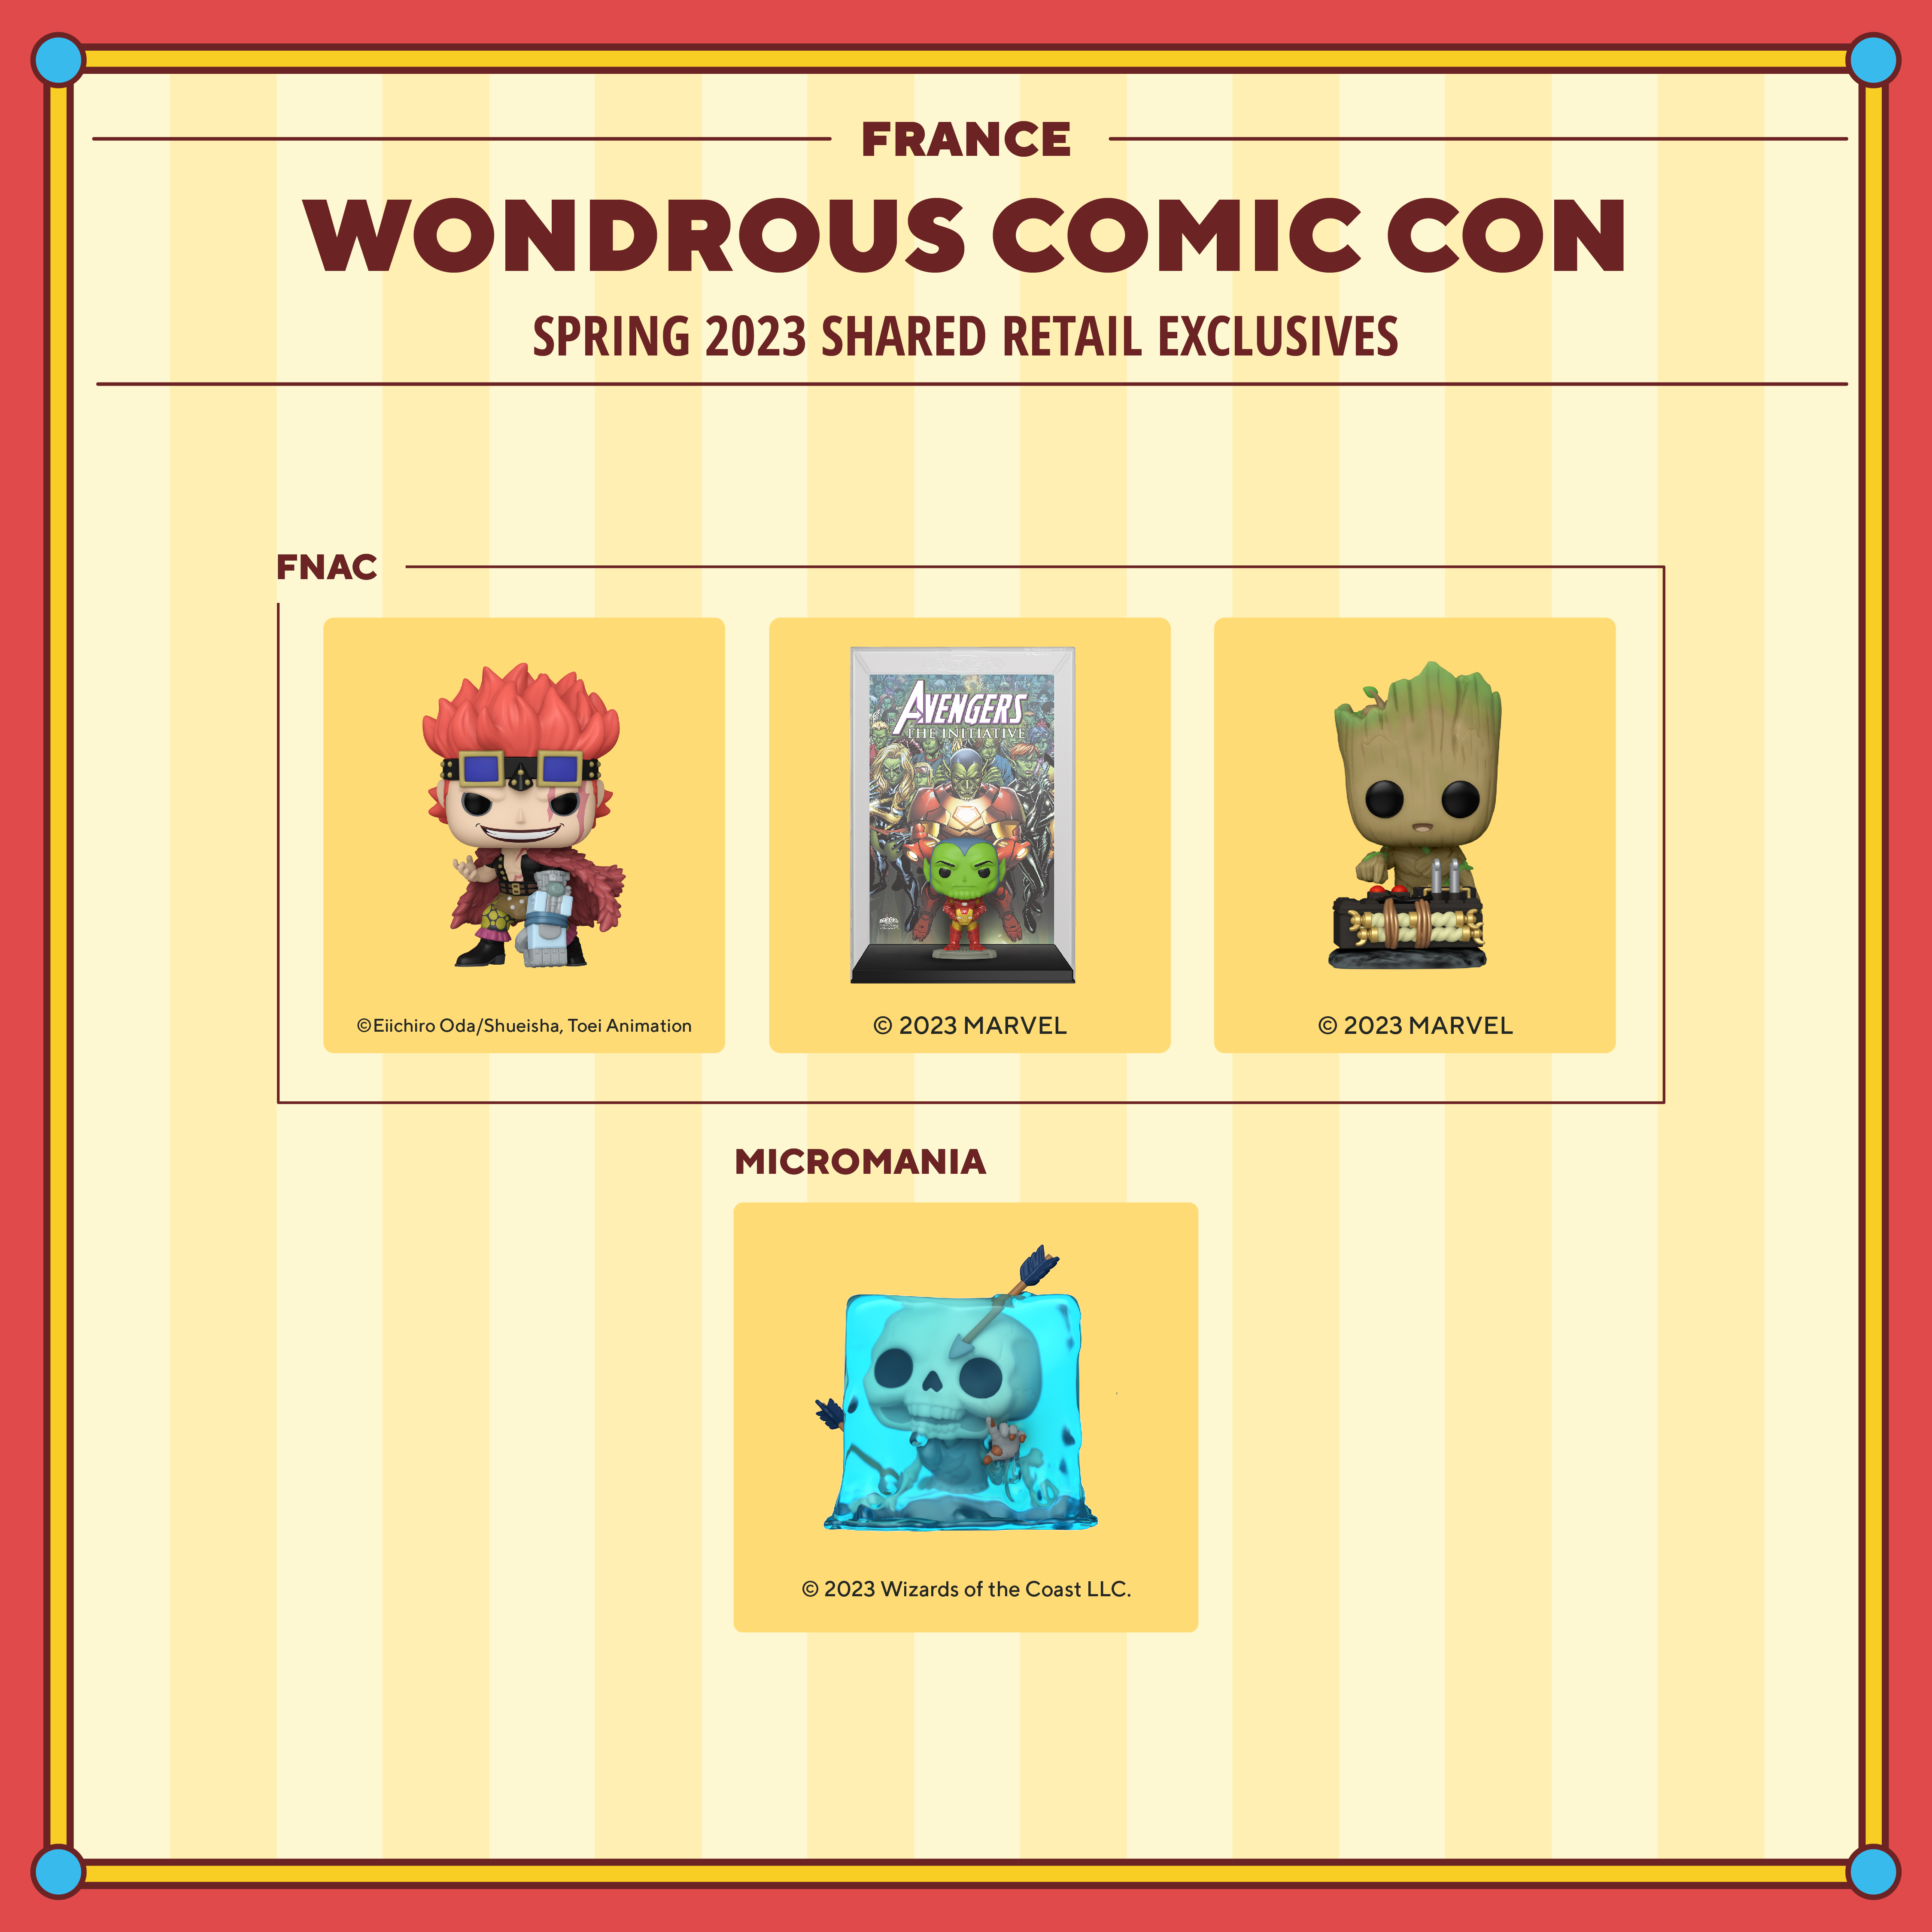 2023 WonderCon France Spring shared retail exclusives. FNAC exclusives include: Pop! Eustuss Kid, Pop! Comic Cover Skrull as Iron Man, and Pop! Baby Groot with Detonator. Micromania exclusives include: Pop! Gelatinous Cube.